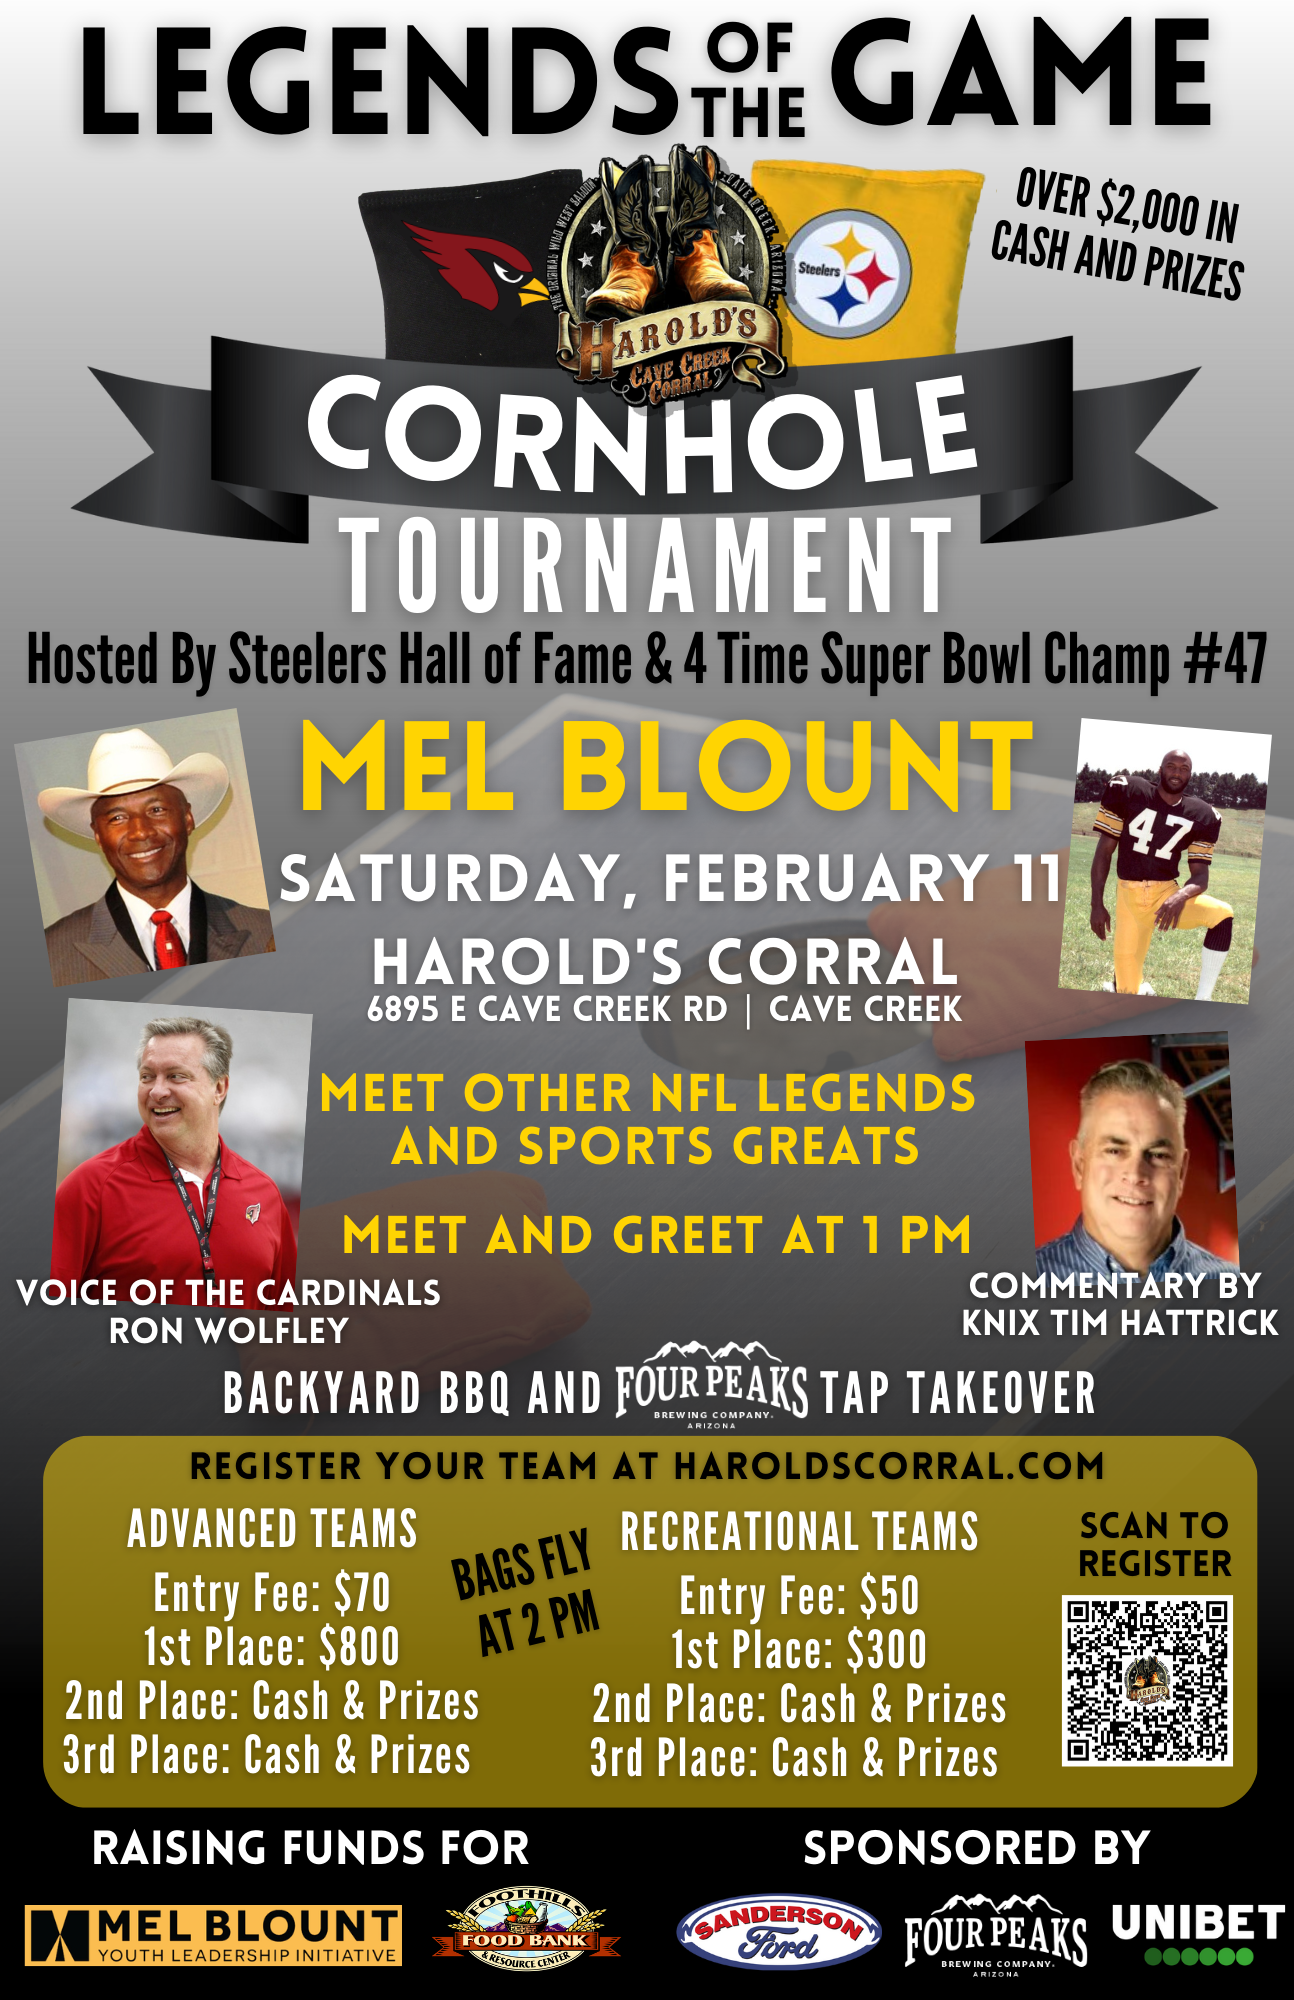 Legends of the Game Cornhole Tournament at Harold's Corral in Cave Creek